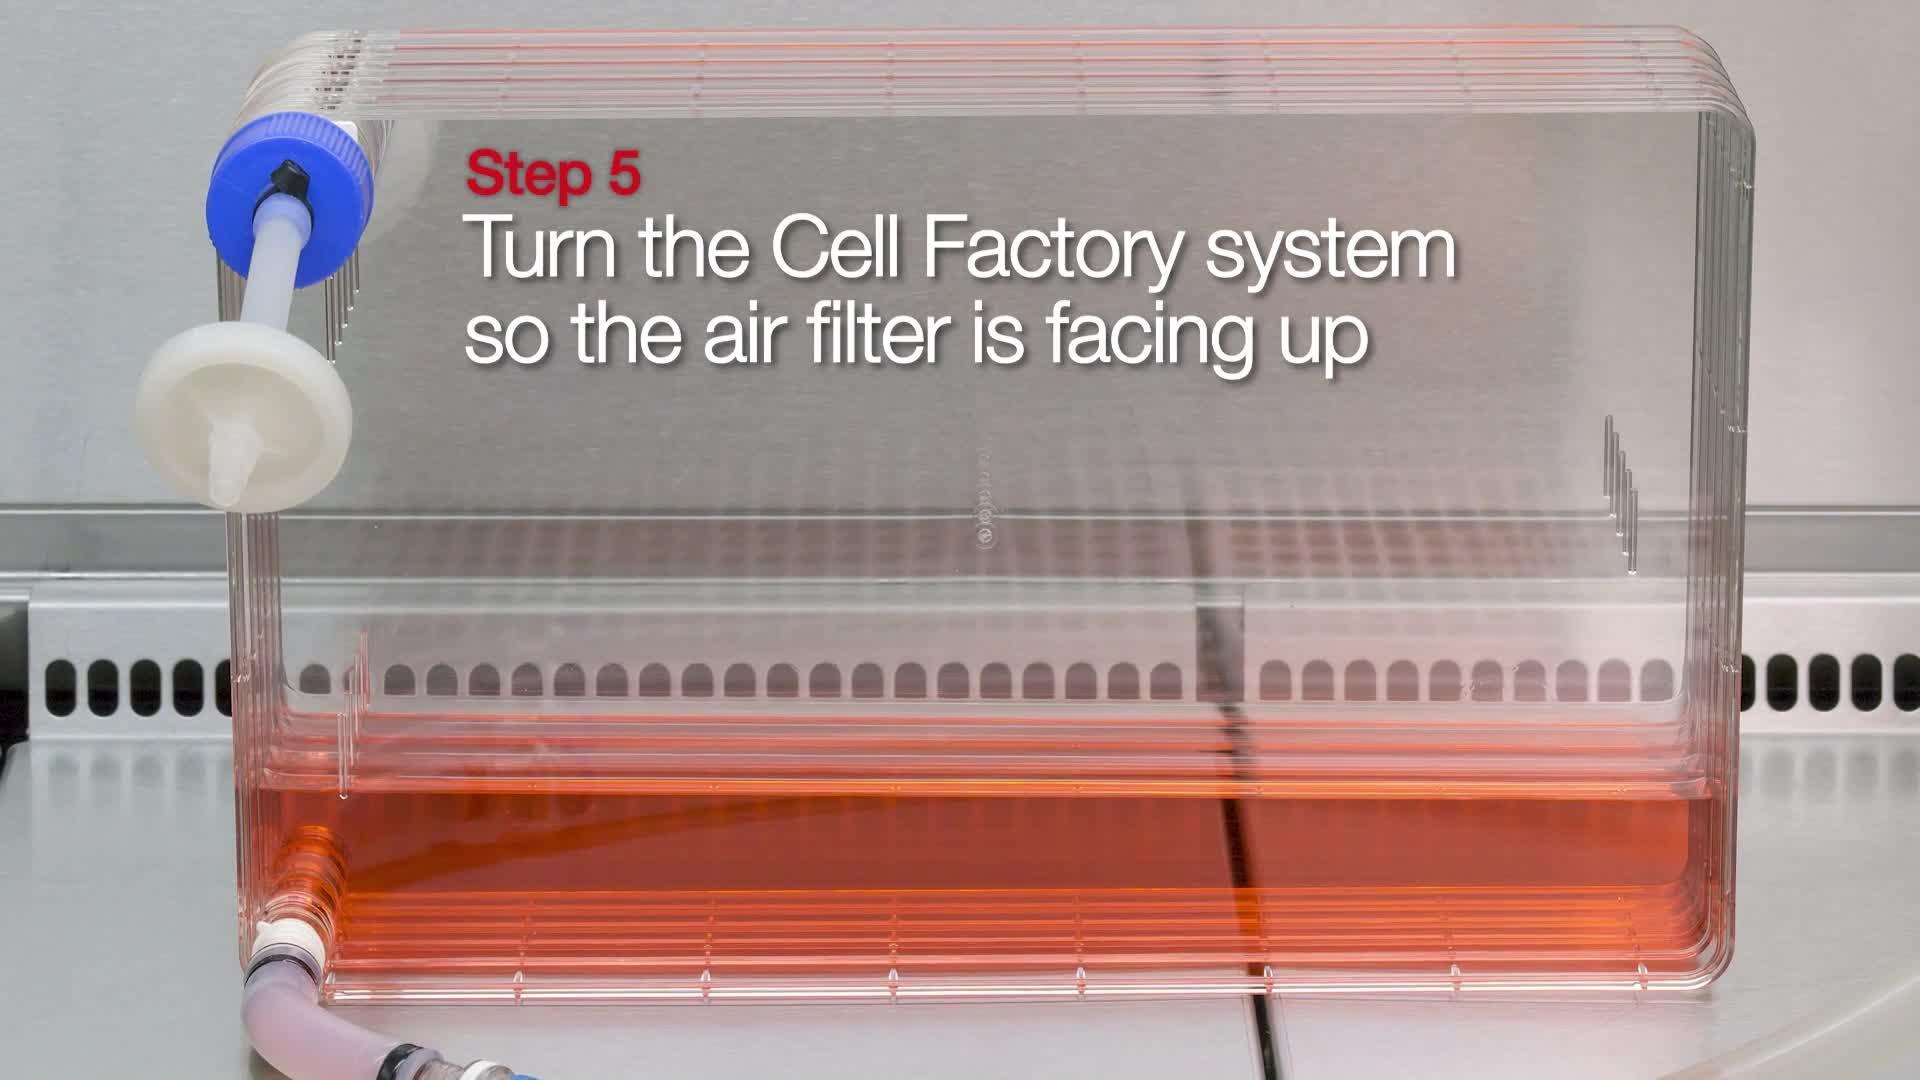 Nunc™ Cell Factory™ Systems